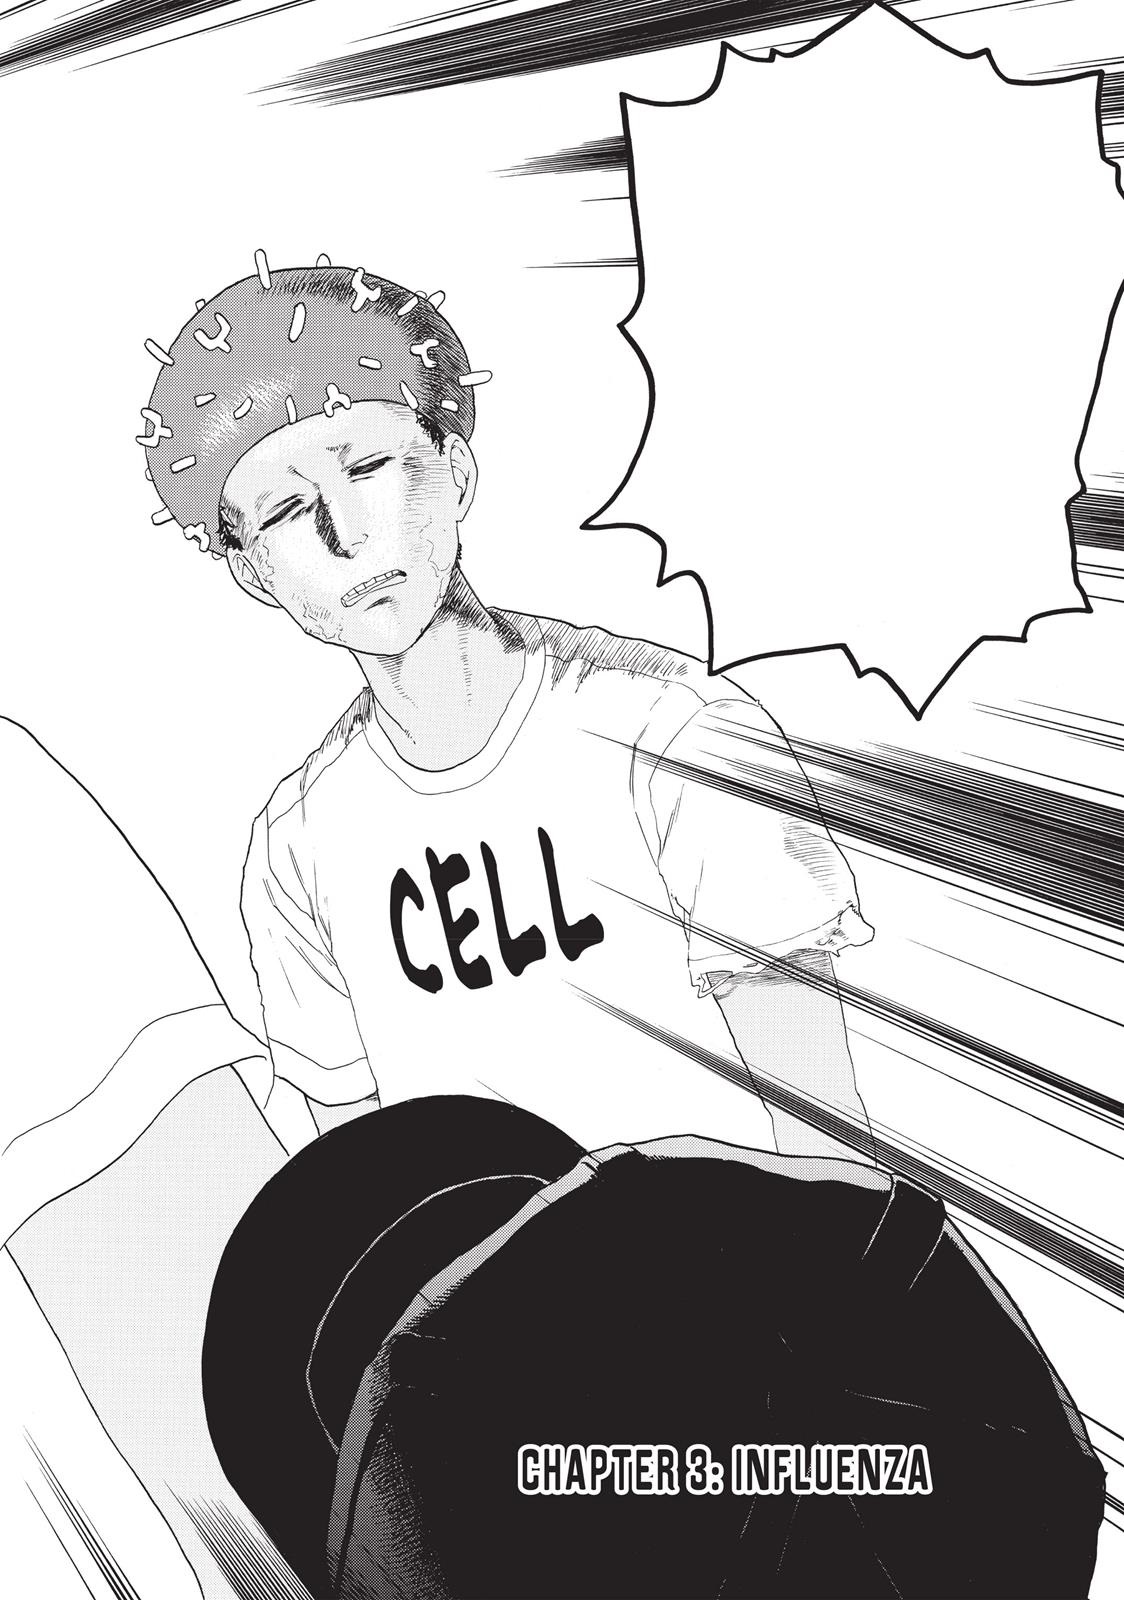 otakujp on X: Manga Cells at Work! will be ended in the next episode. The  last arc is about Covid-19. There are enemies that cannot be overlooked  The anime Season 2 starts